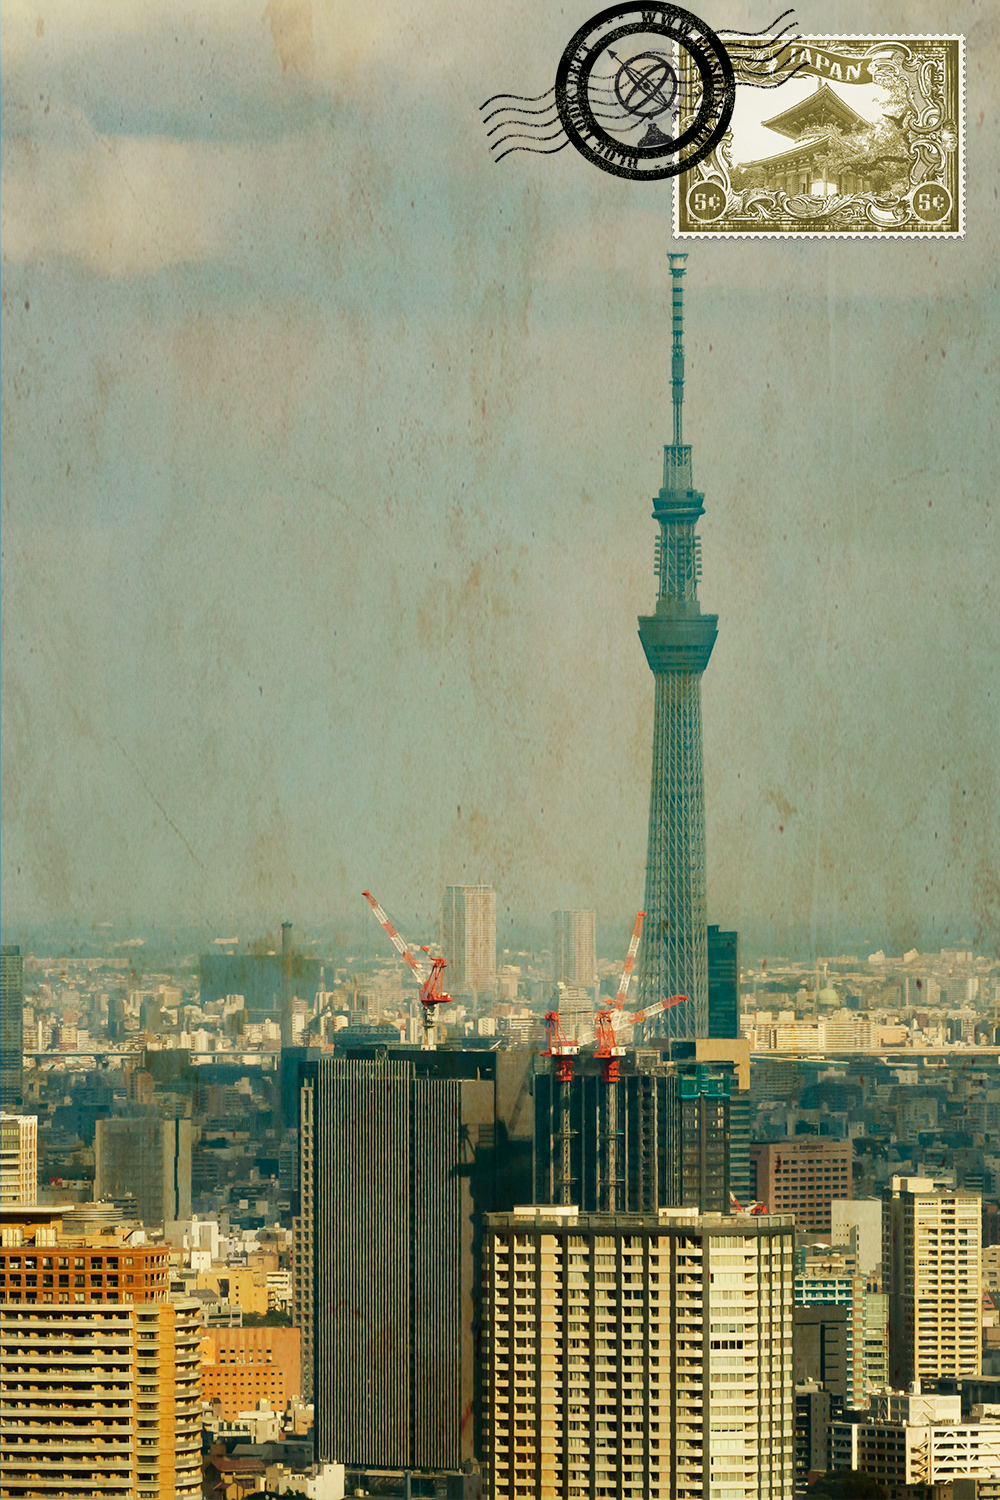 View over the Tokyo Skytree